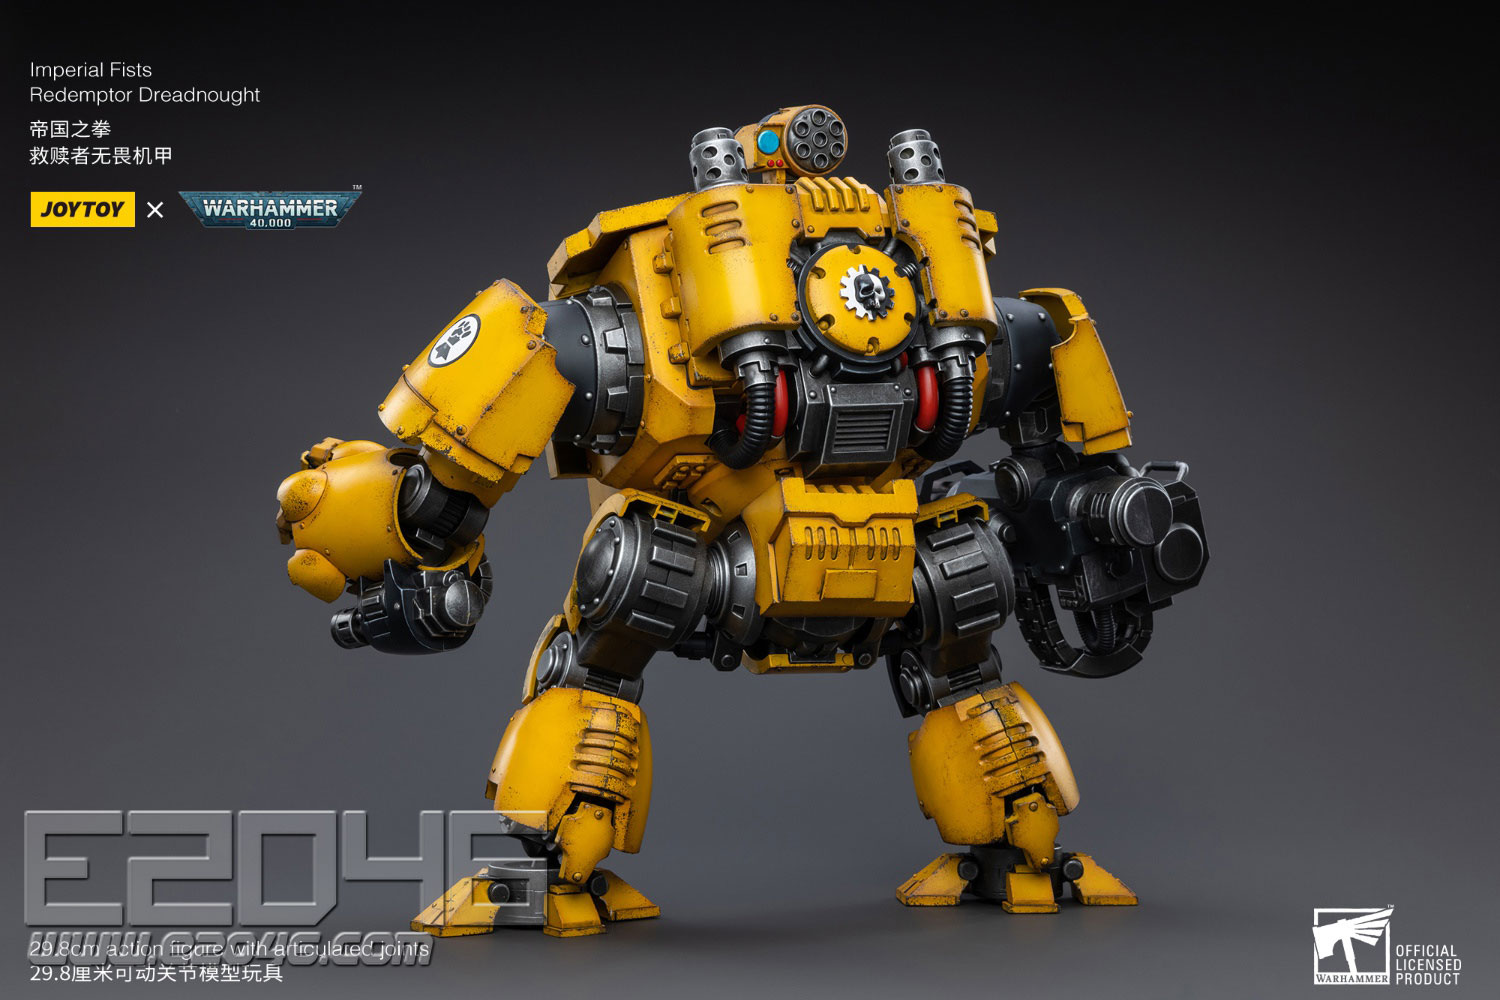 Imperial Fists Redemptor Dreadnought (DOLL)